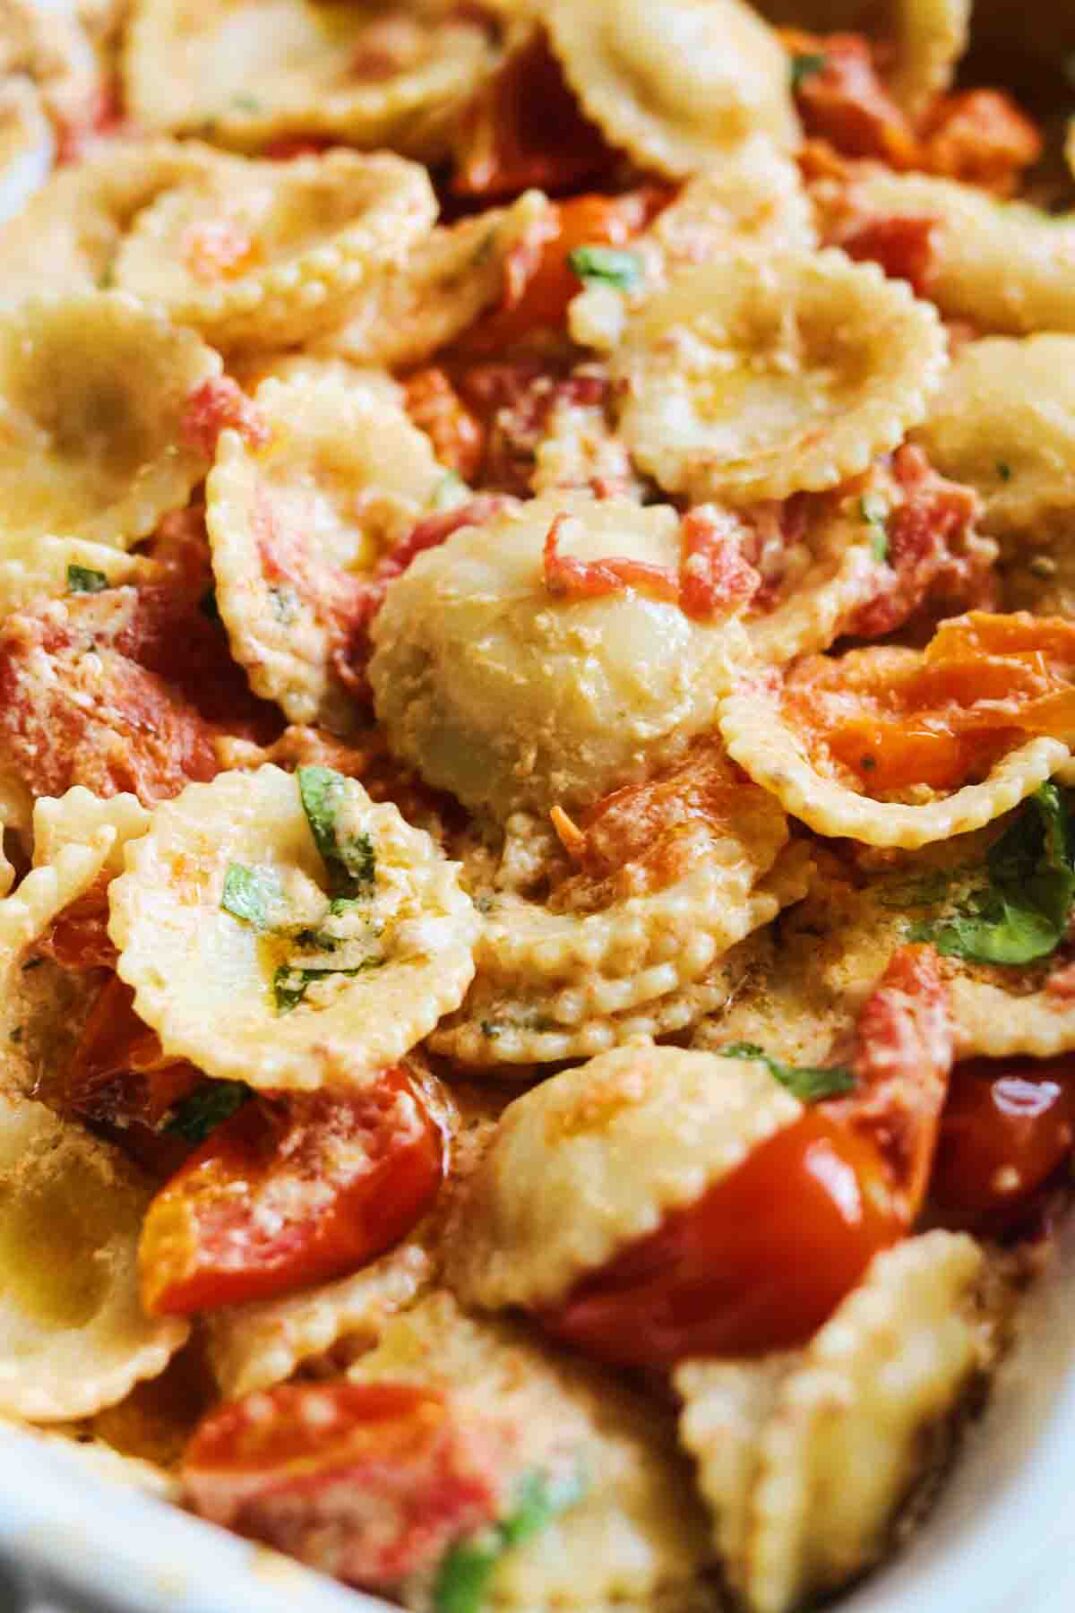 melted tomatoes, creamy boursin and pasta in a white baking dish.